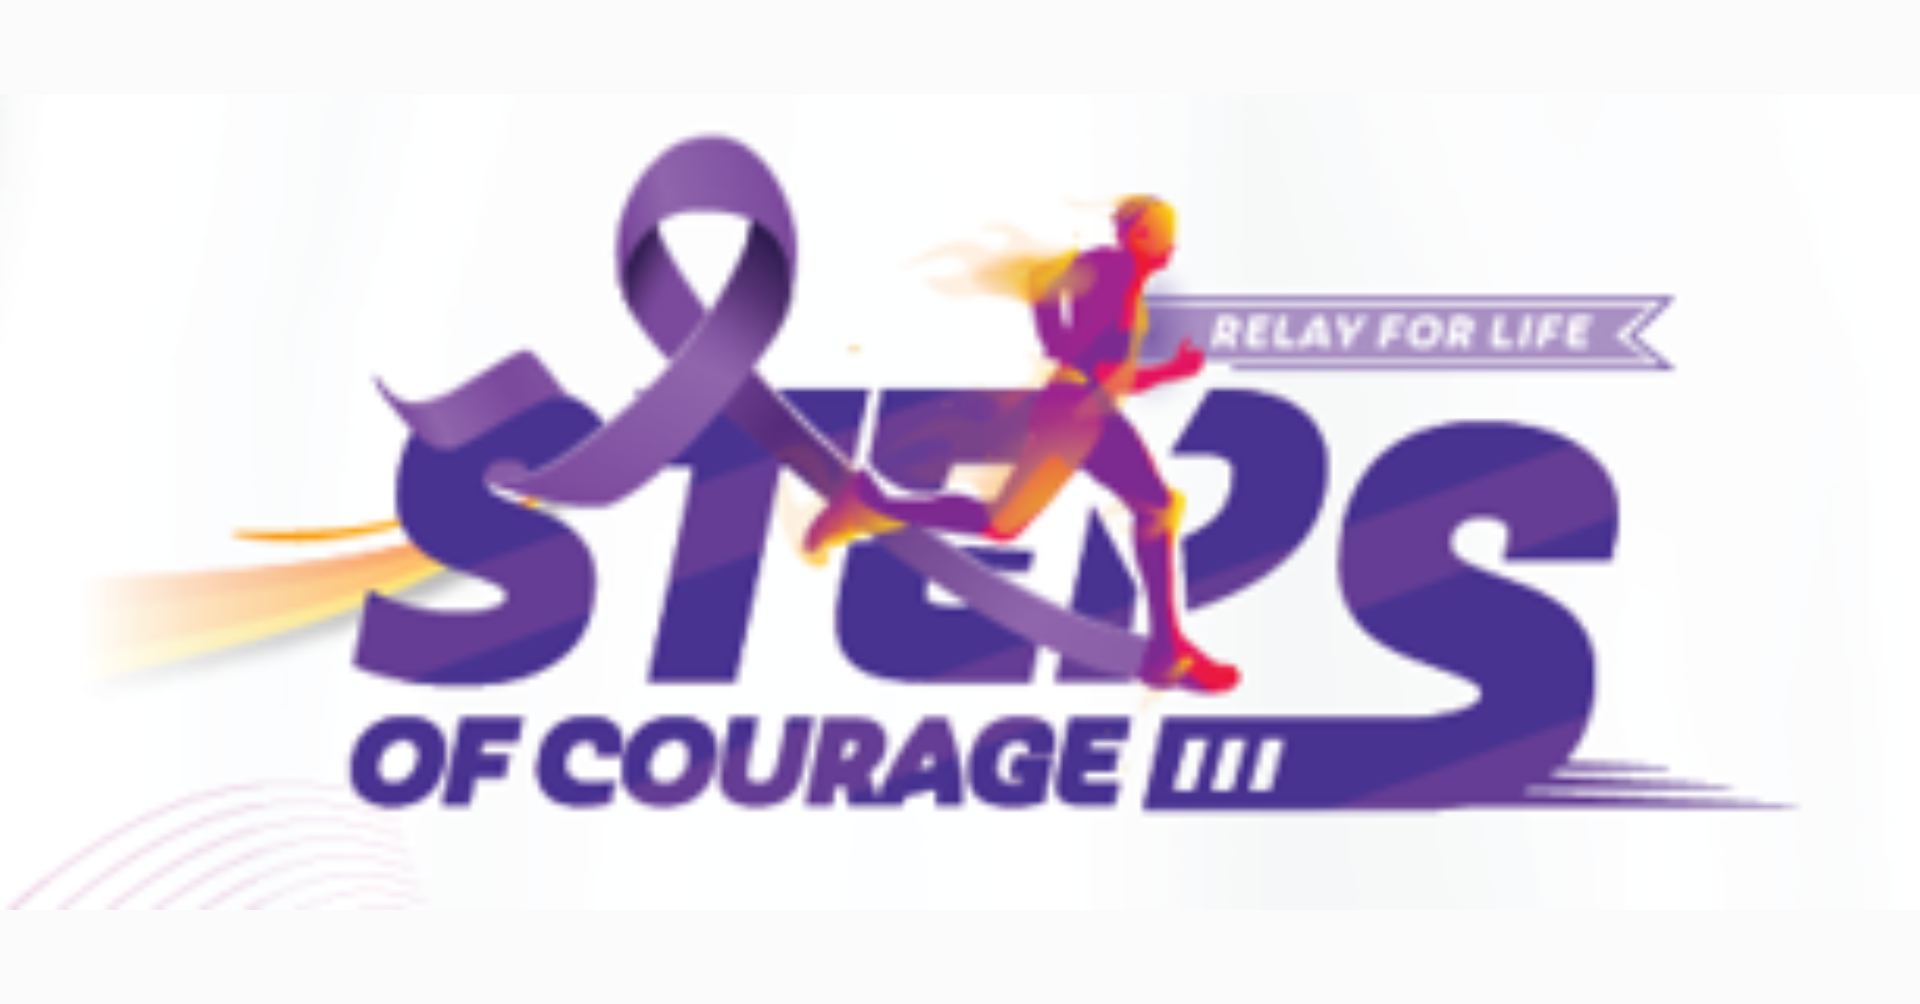 Logo of Relay For Life 2023